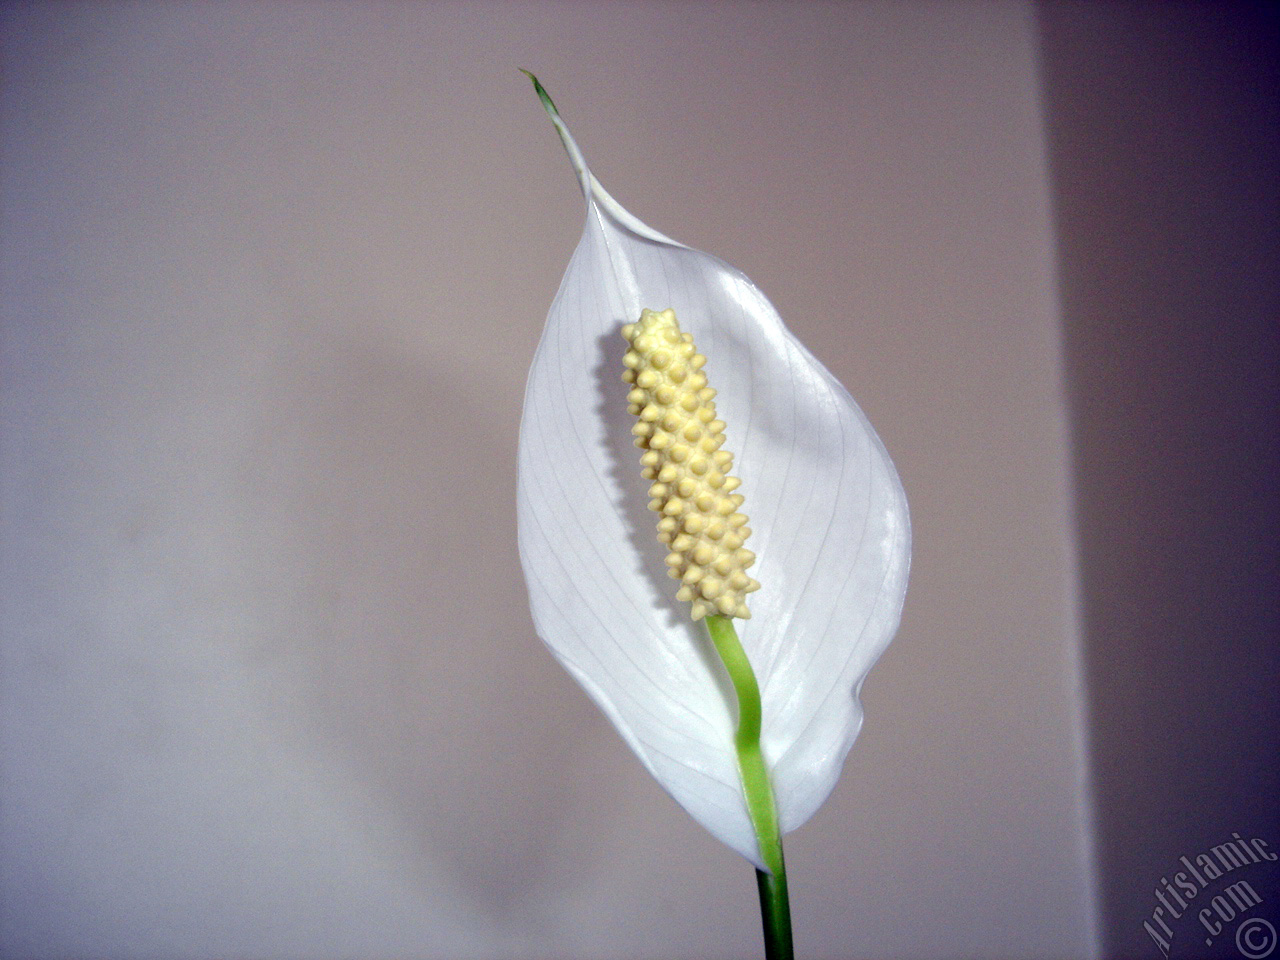 White color Peace Lily -Spath- flower.
